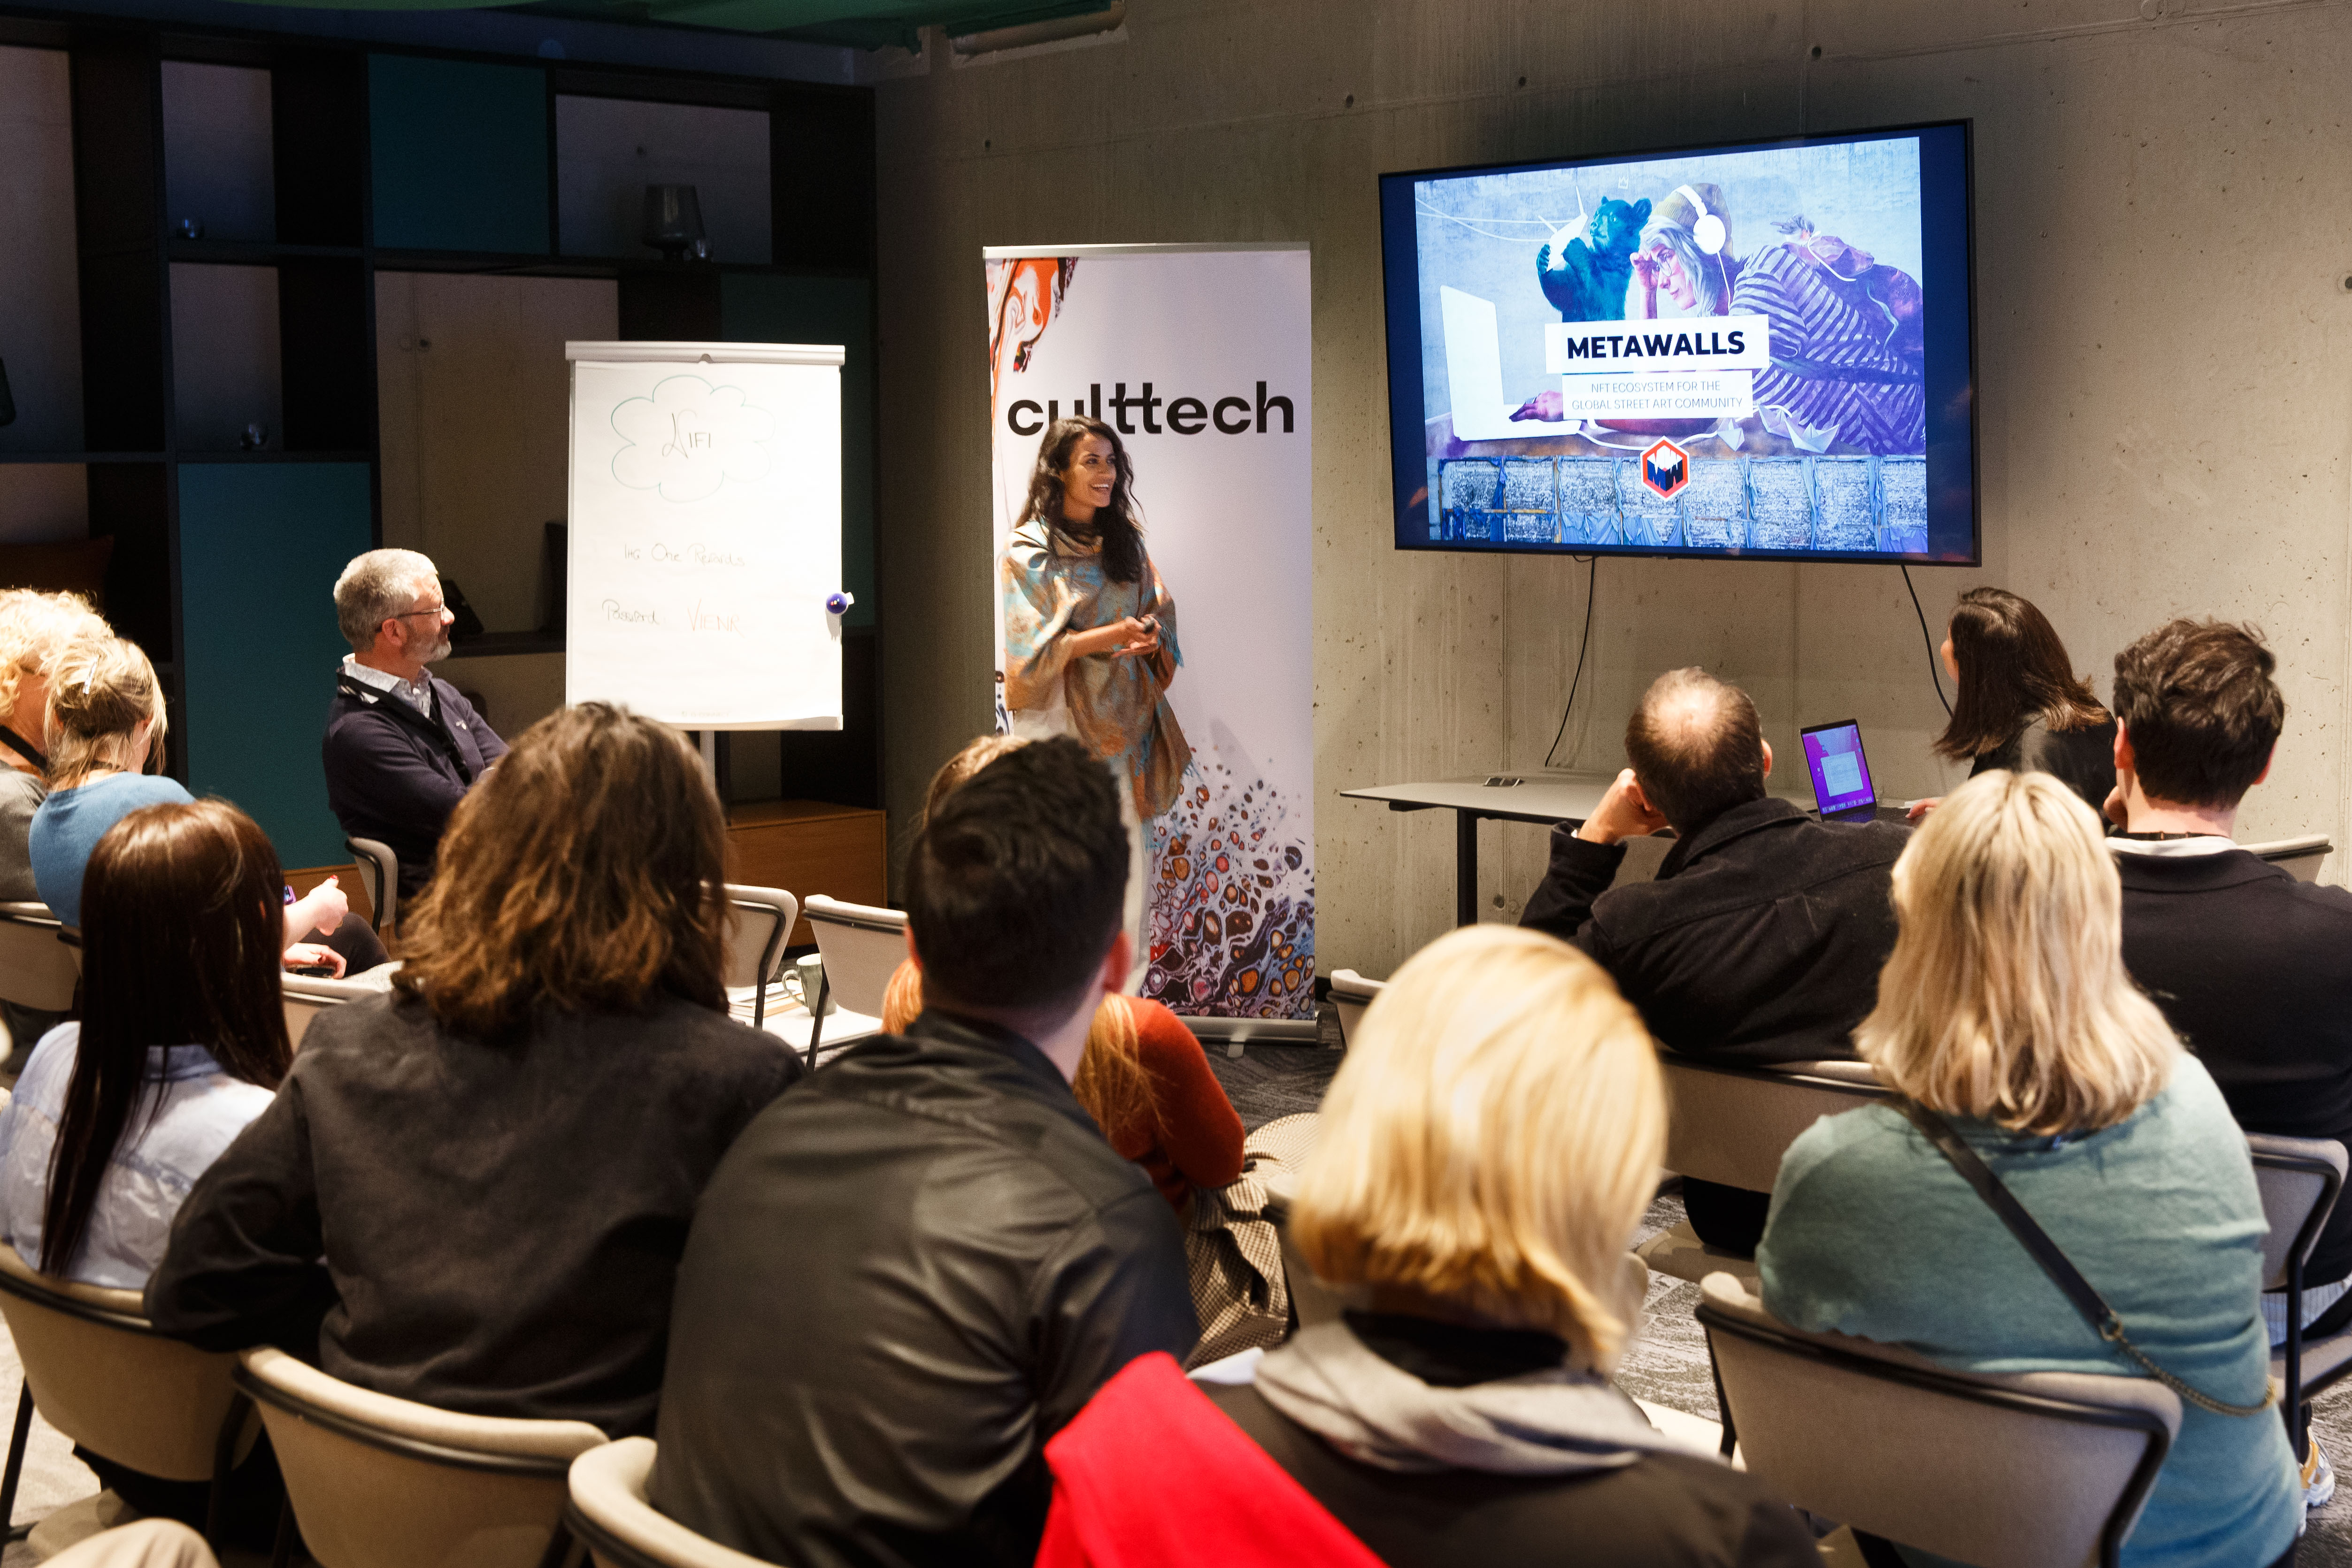 CultTech Looking to Empower Culture With Tech at ViennaUP